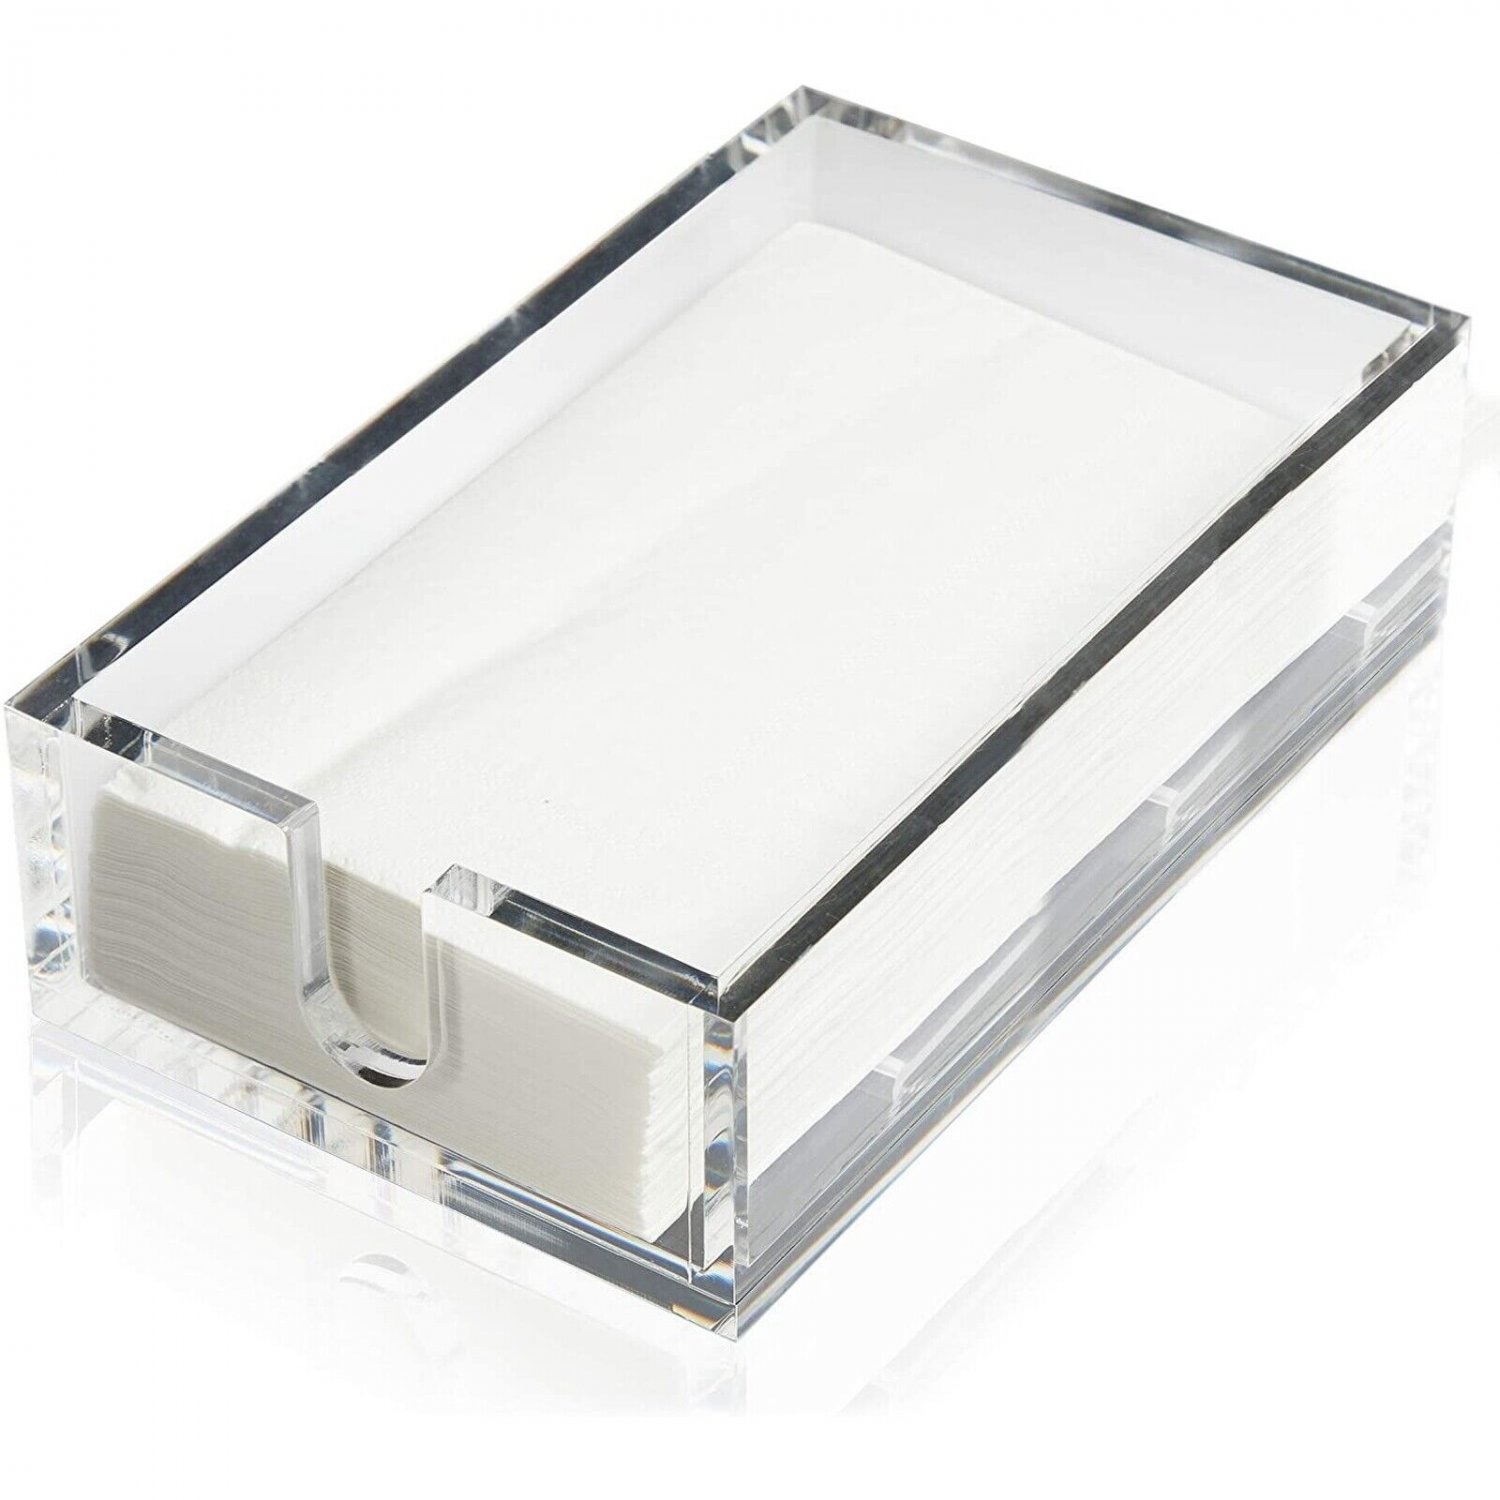 Clear Acrylic Napkin Holder with 50-Pack Plain White Napkins, 9.0x5.5x2.6 in